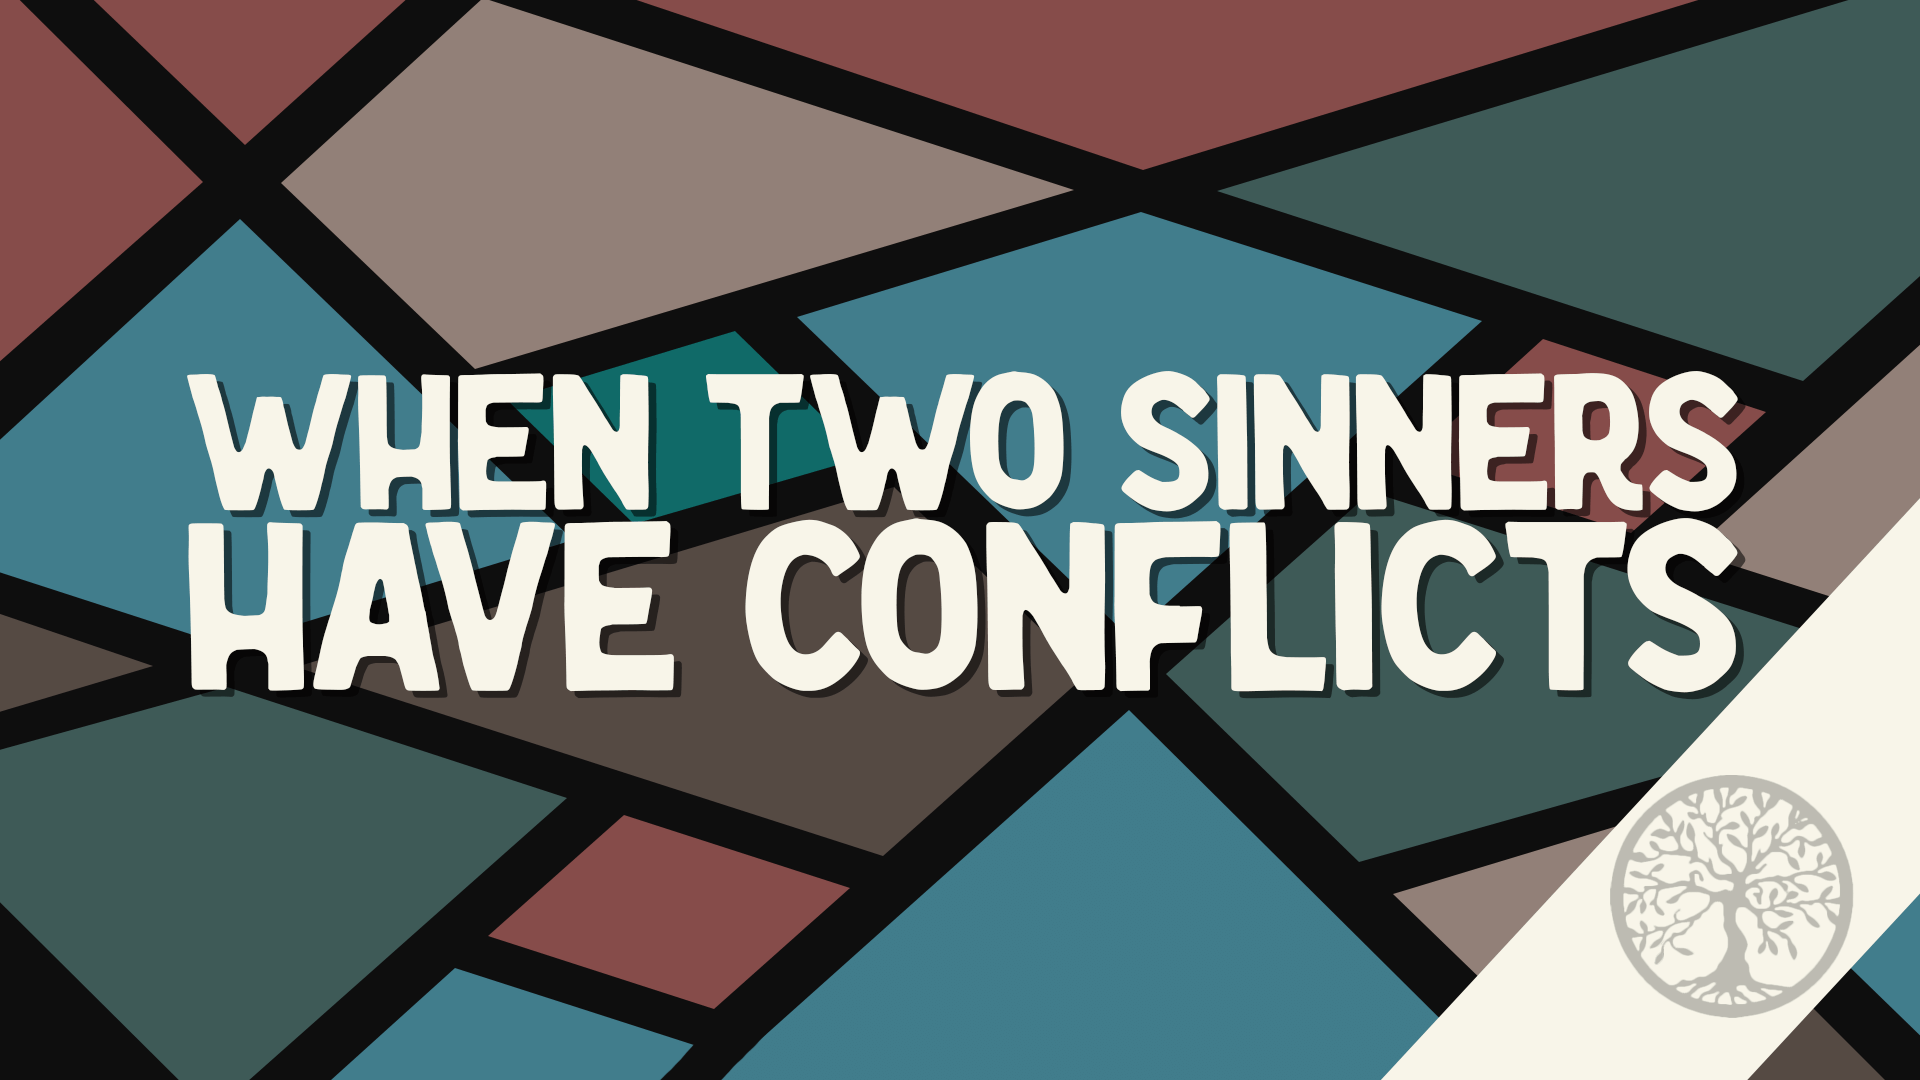 When Two Sinners Have Conflicts